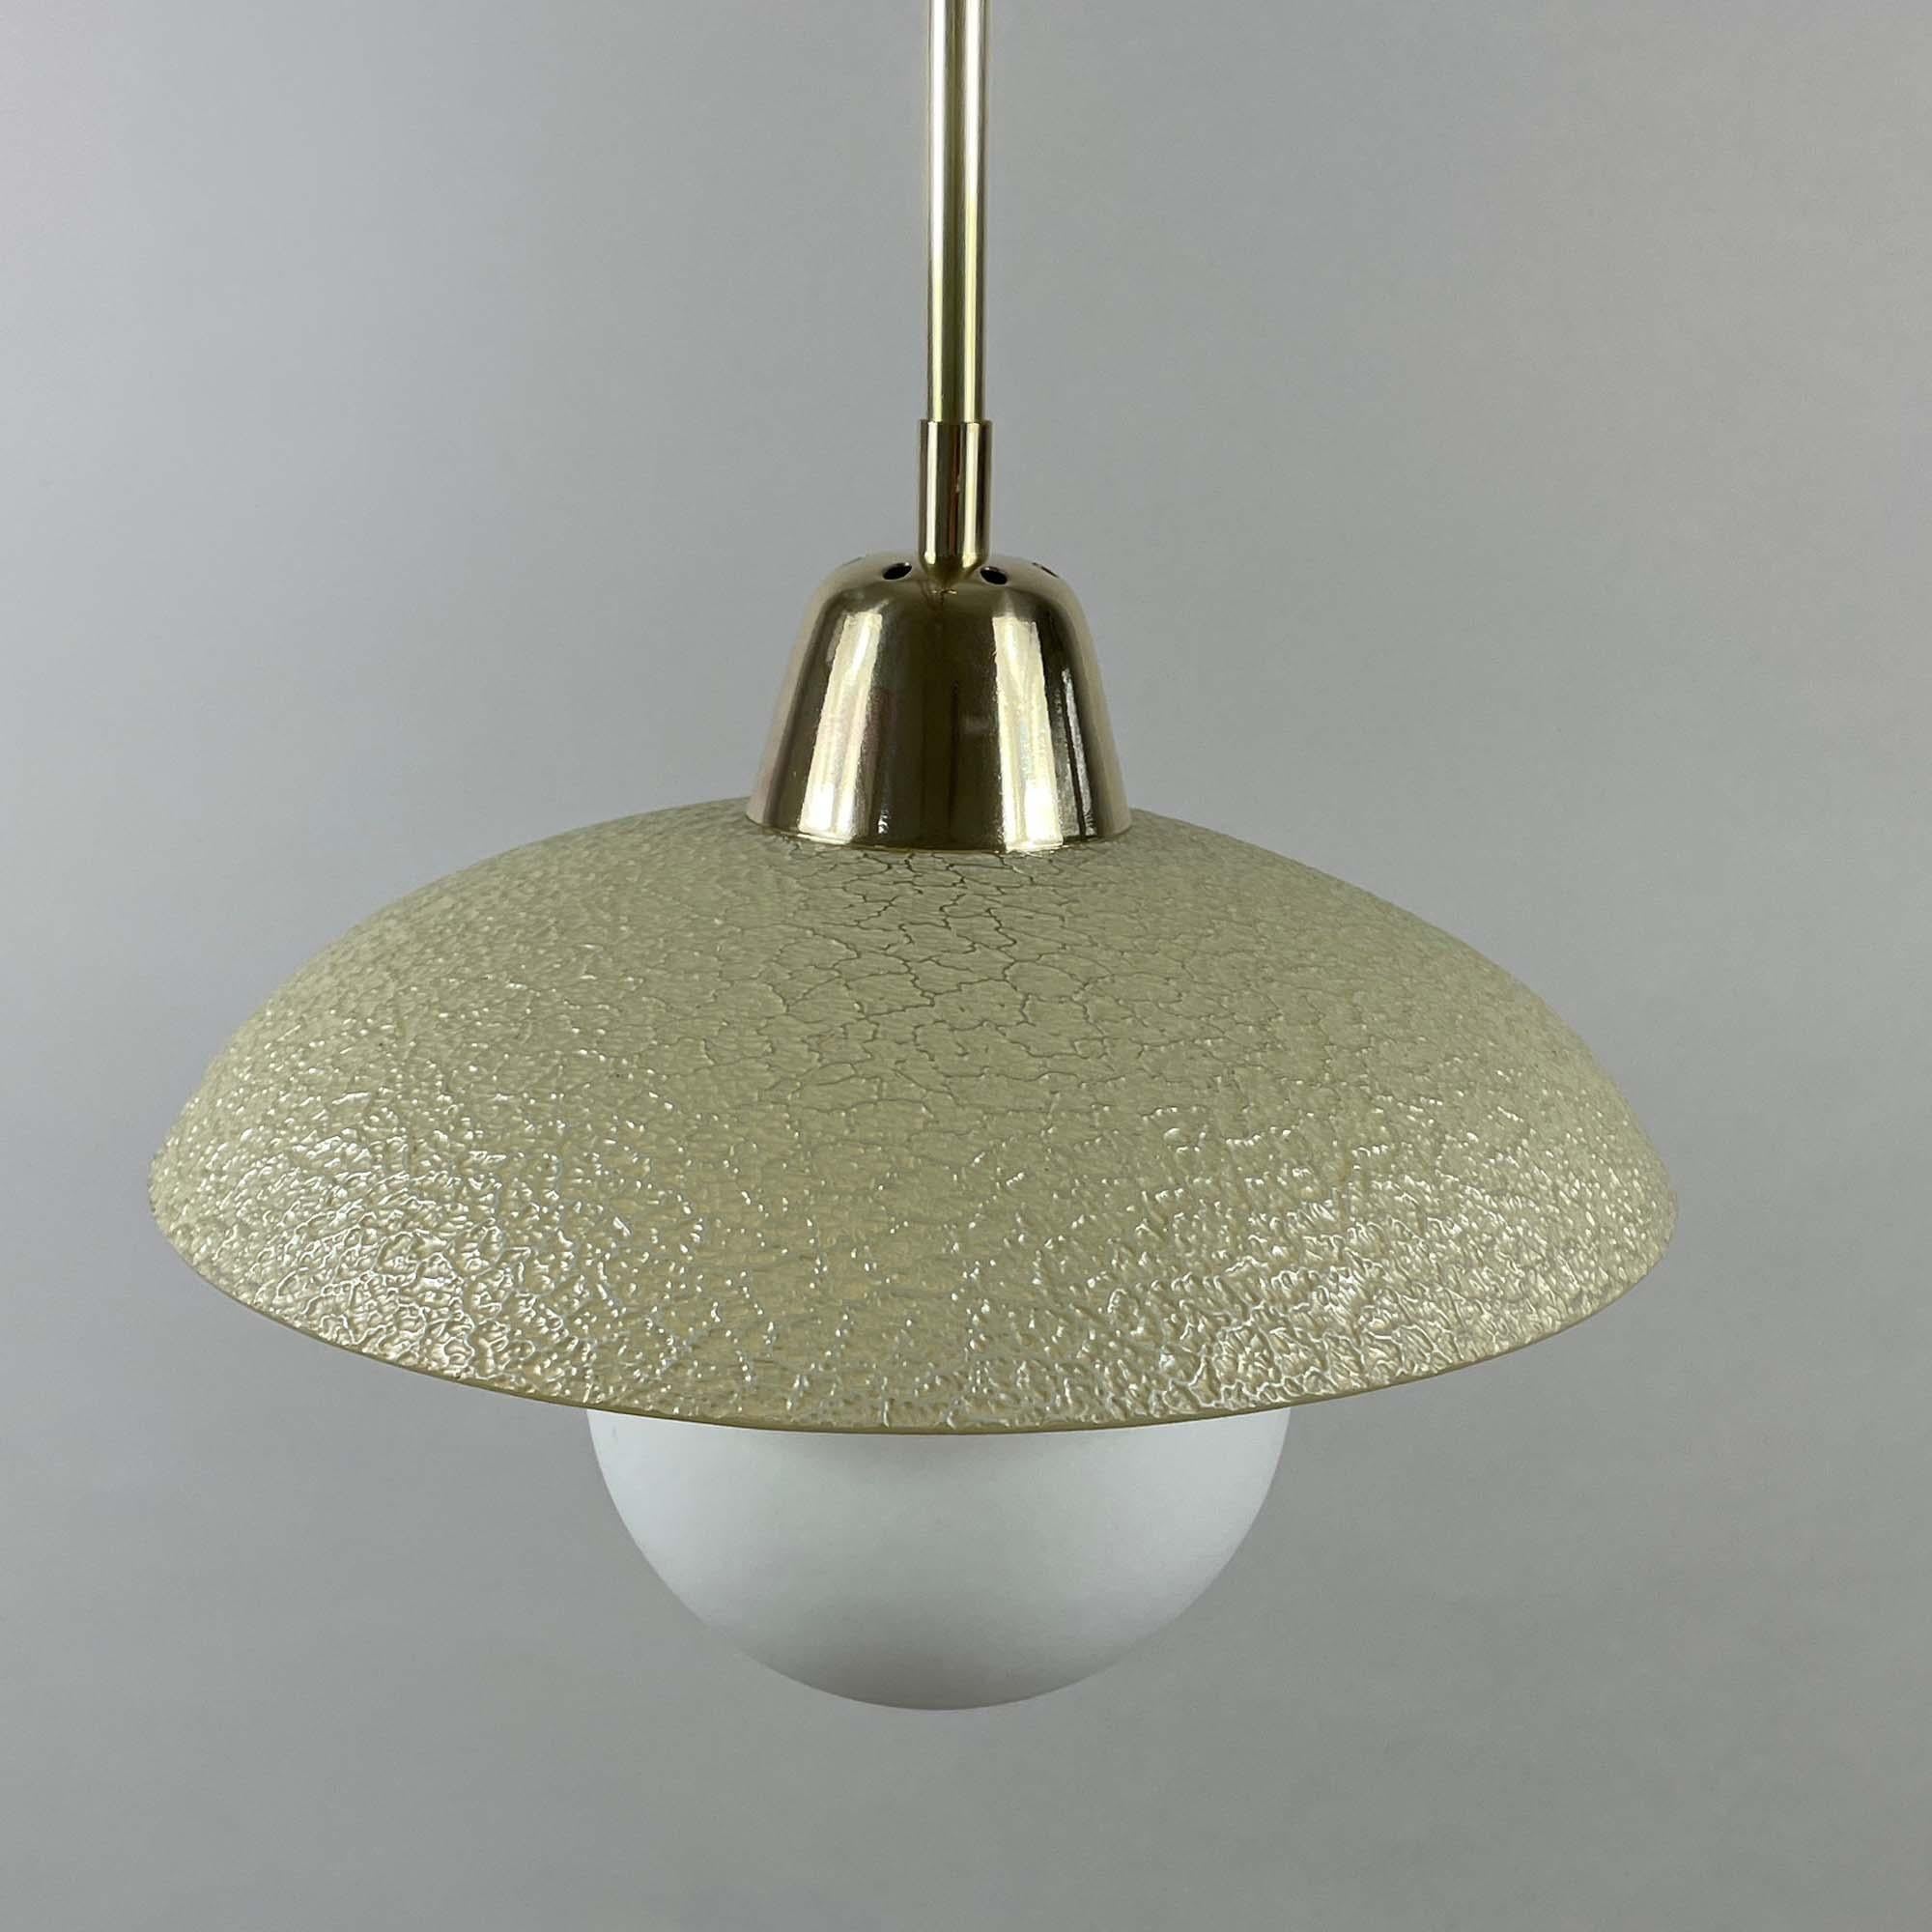 Cream Textured Glass and Brass Pendants, Sweden 1940s to 1950s For Sale 8